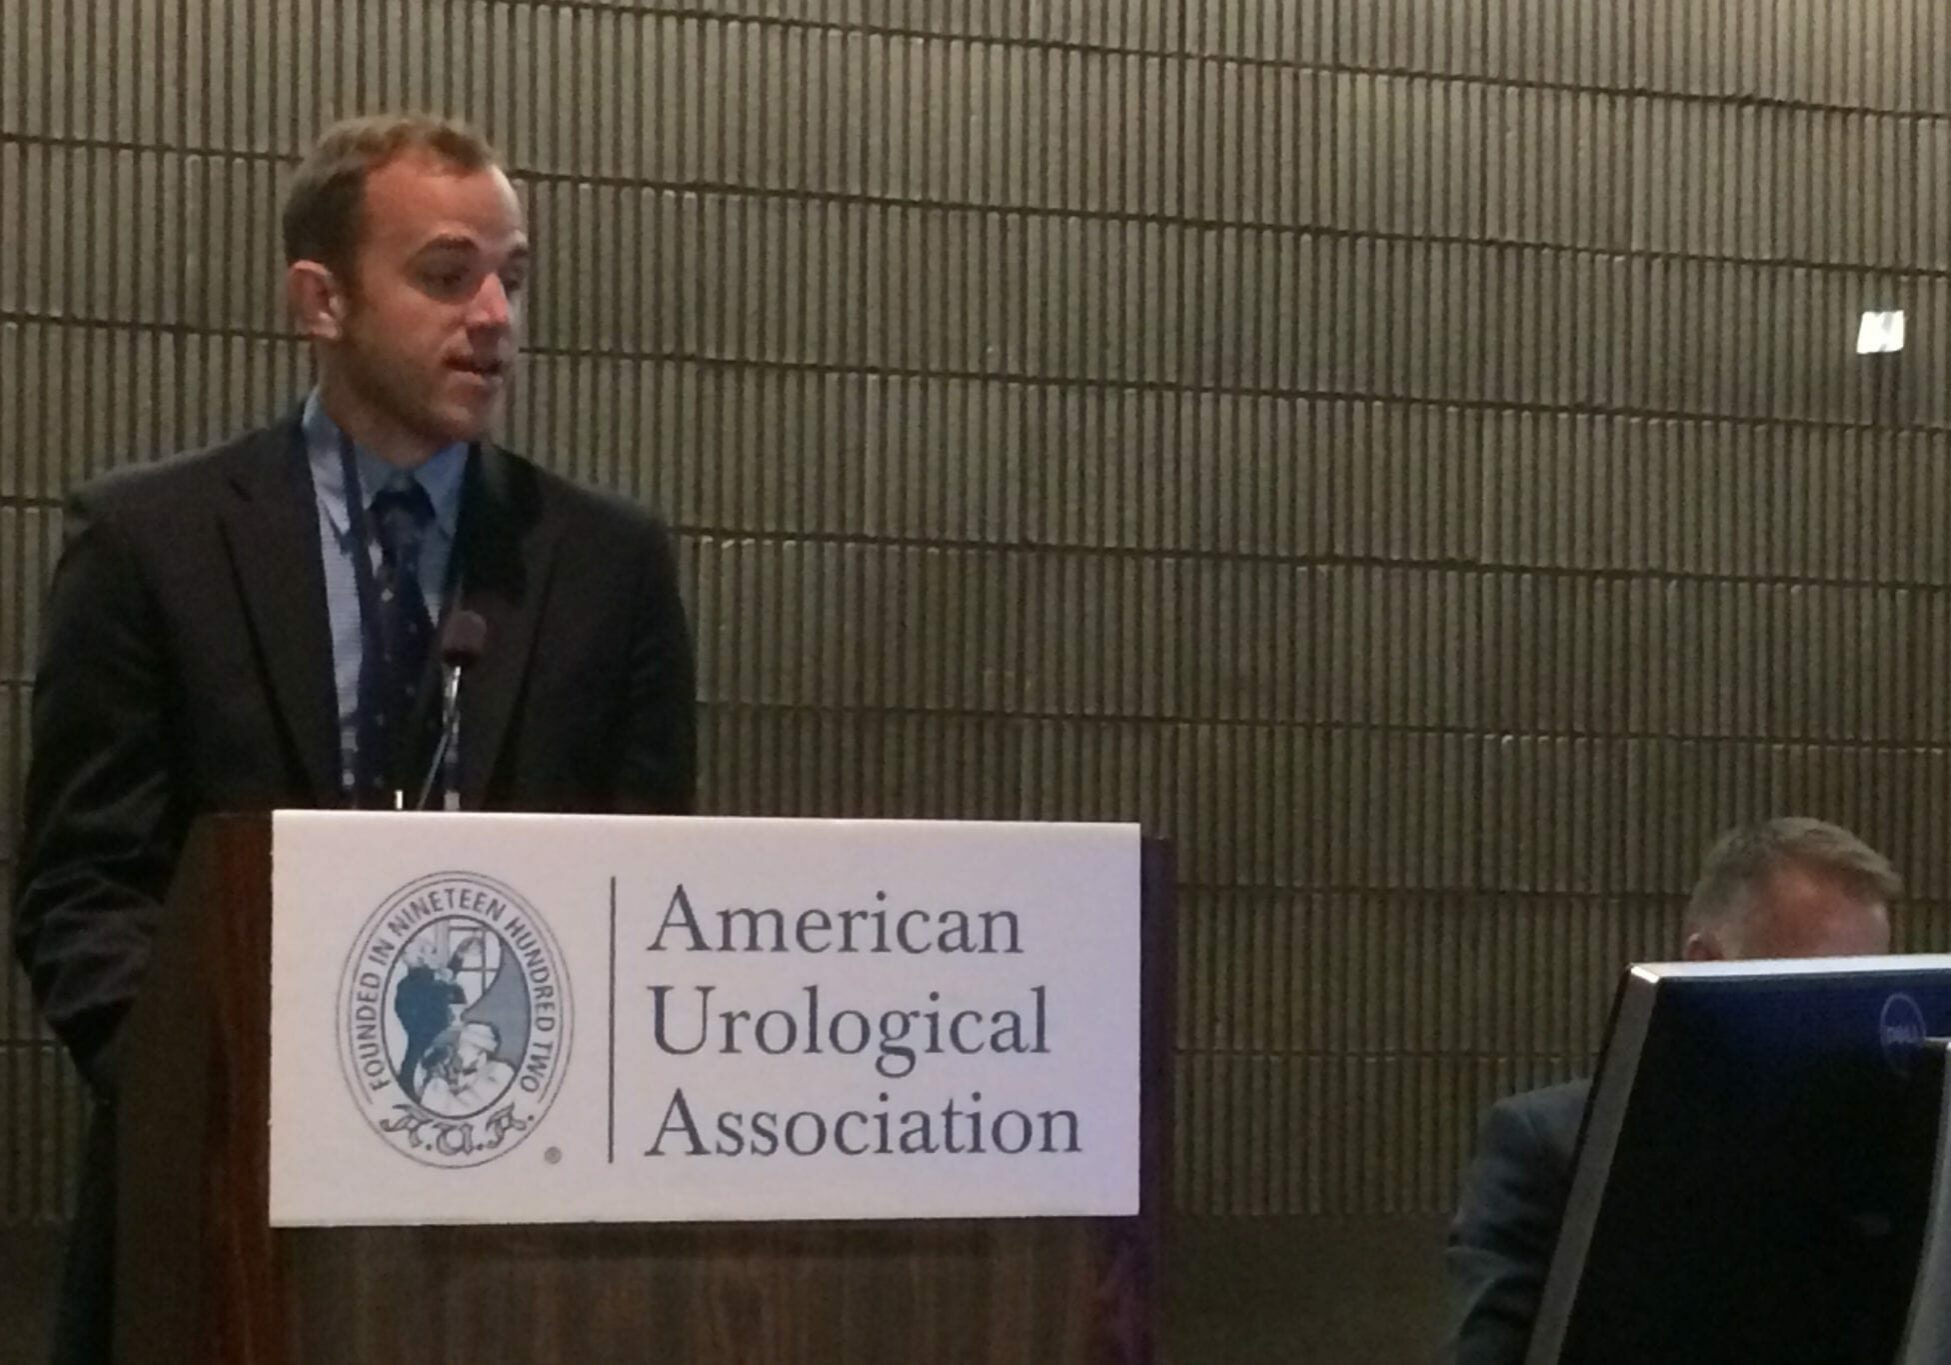 Aaron Shoskes, D.O.'18, presents his research at the American Urological Association Annual Meeting.